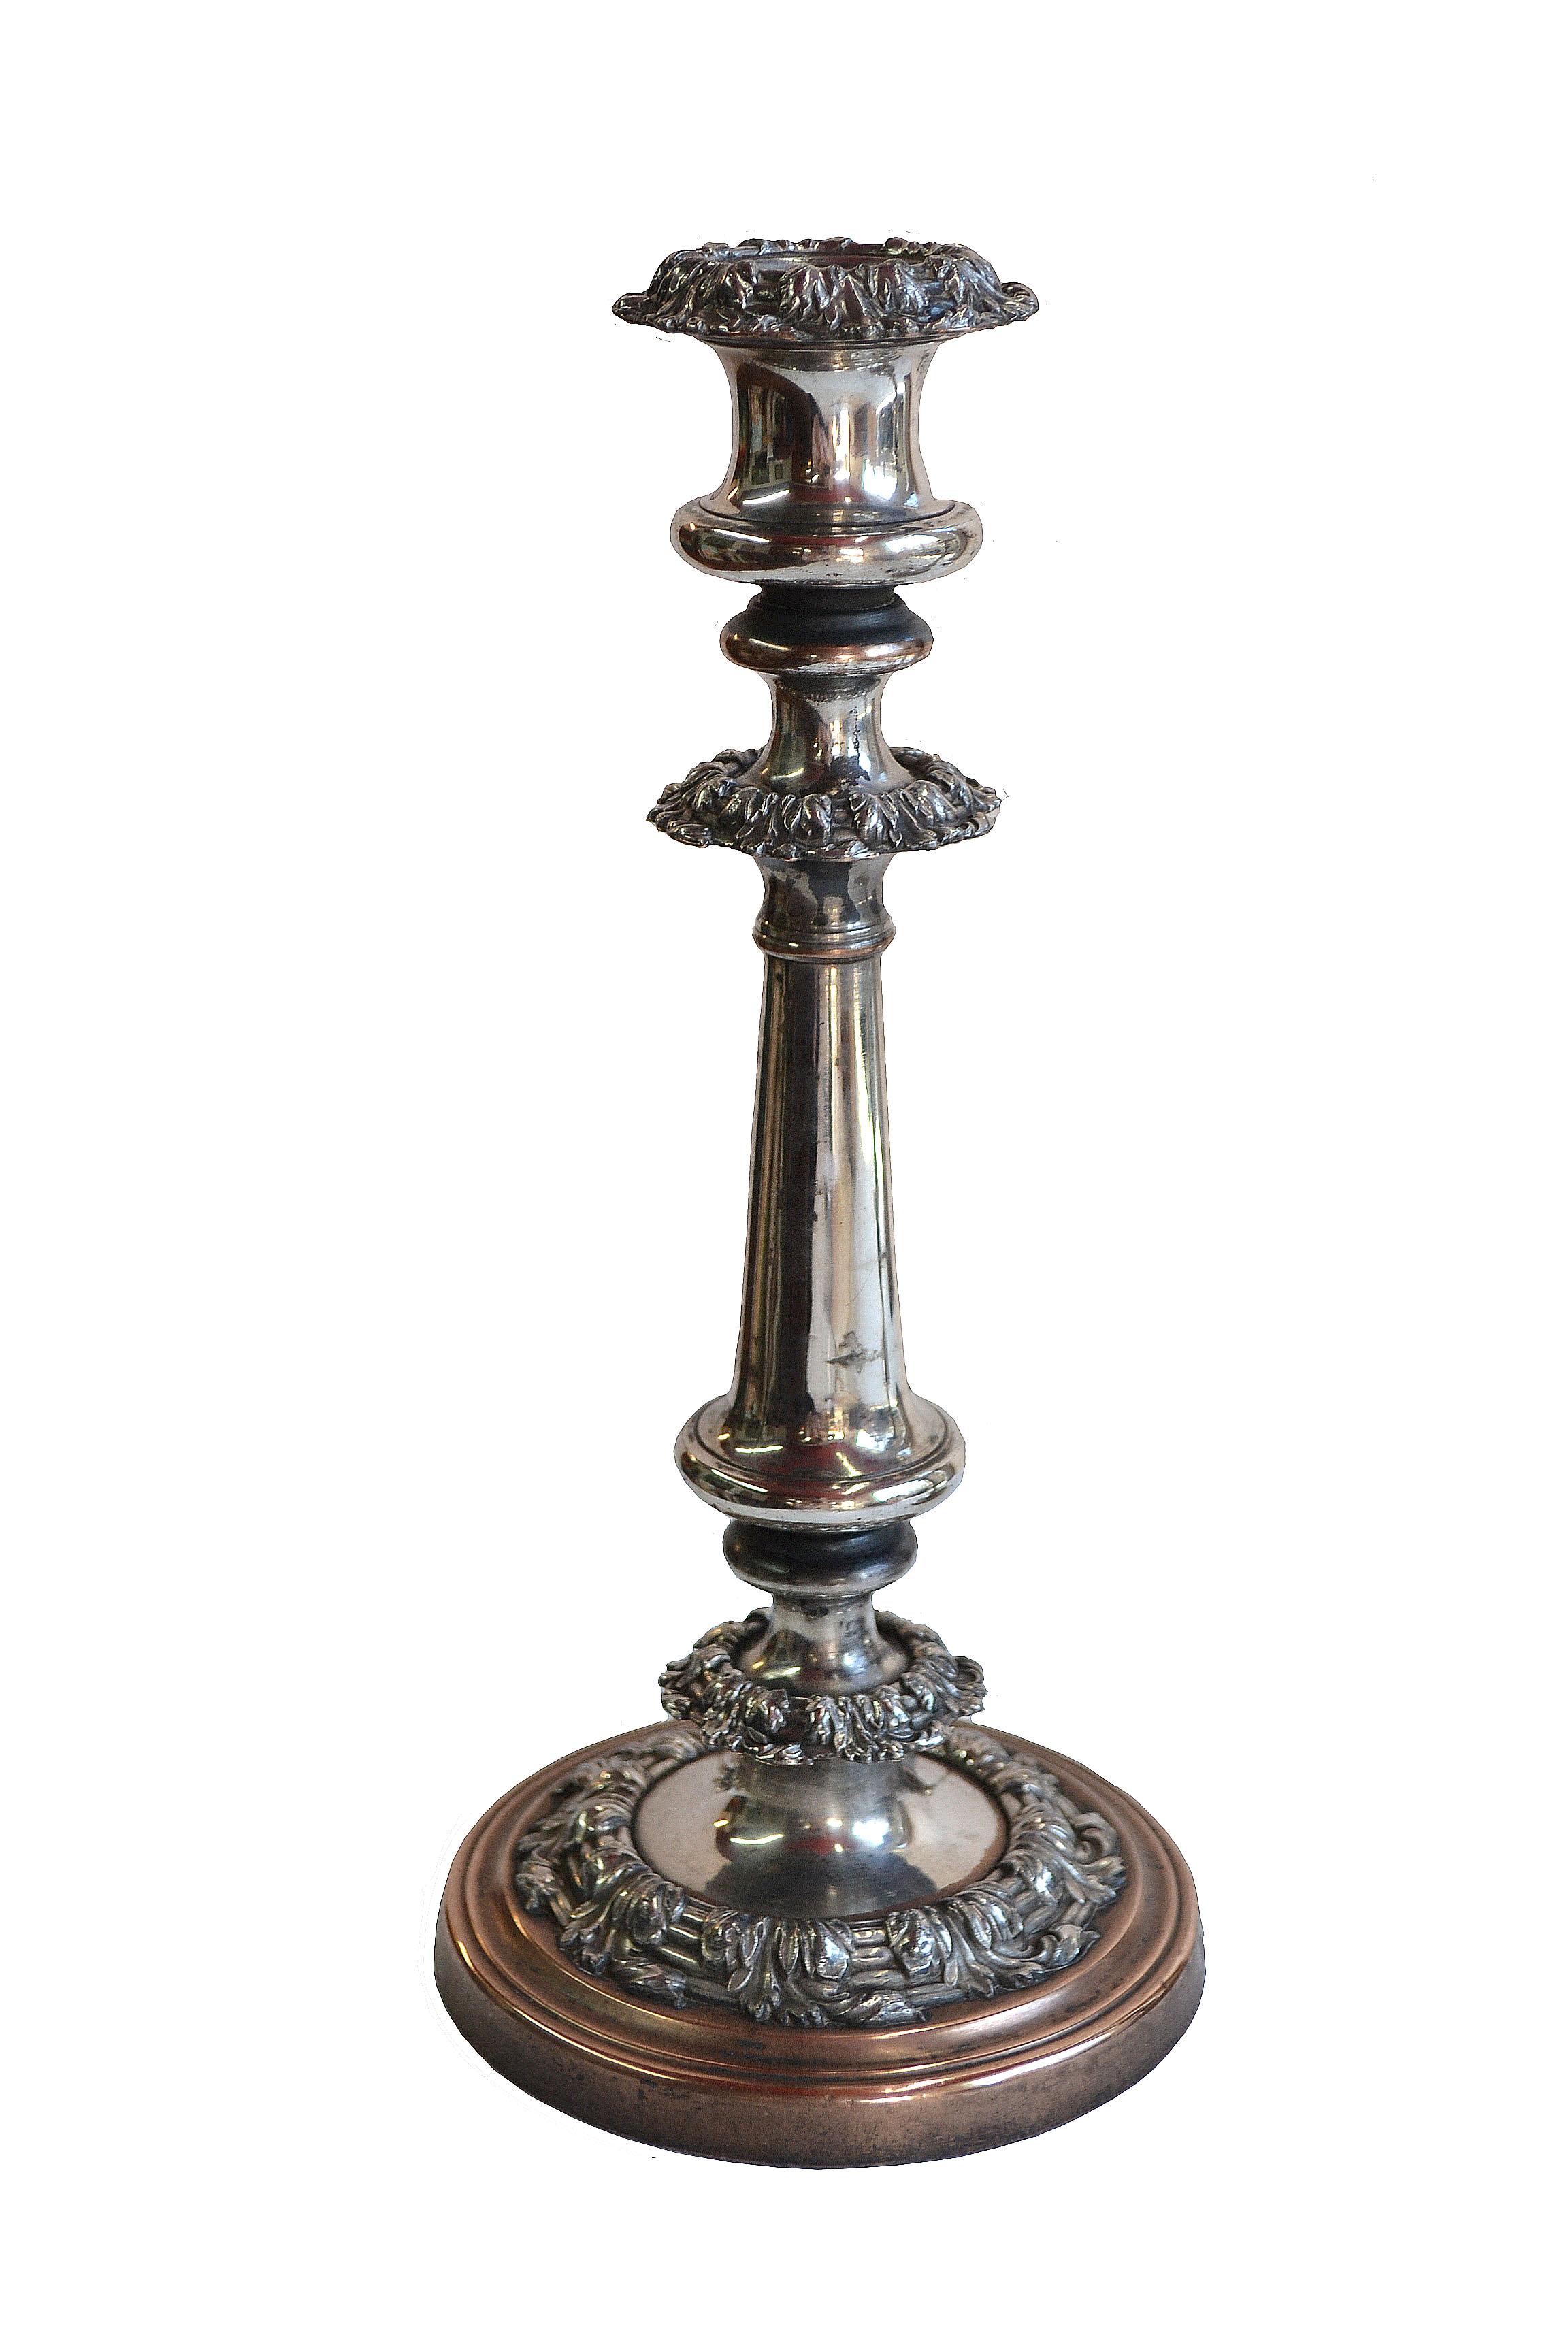 19th Century Georgian, Sheffield Silver Plate Candlesticks, Pair

Pair of English, Georgian, George IV Sheffield silver plate candlesticks. Vintage, distressed silver finish. Silver loss to base. Minor loss to other areas. Hollow ware, circa 1820.